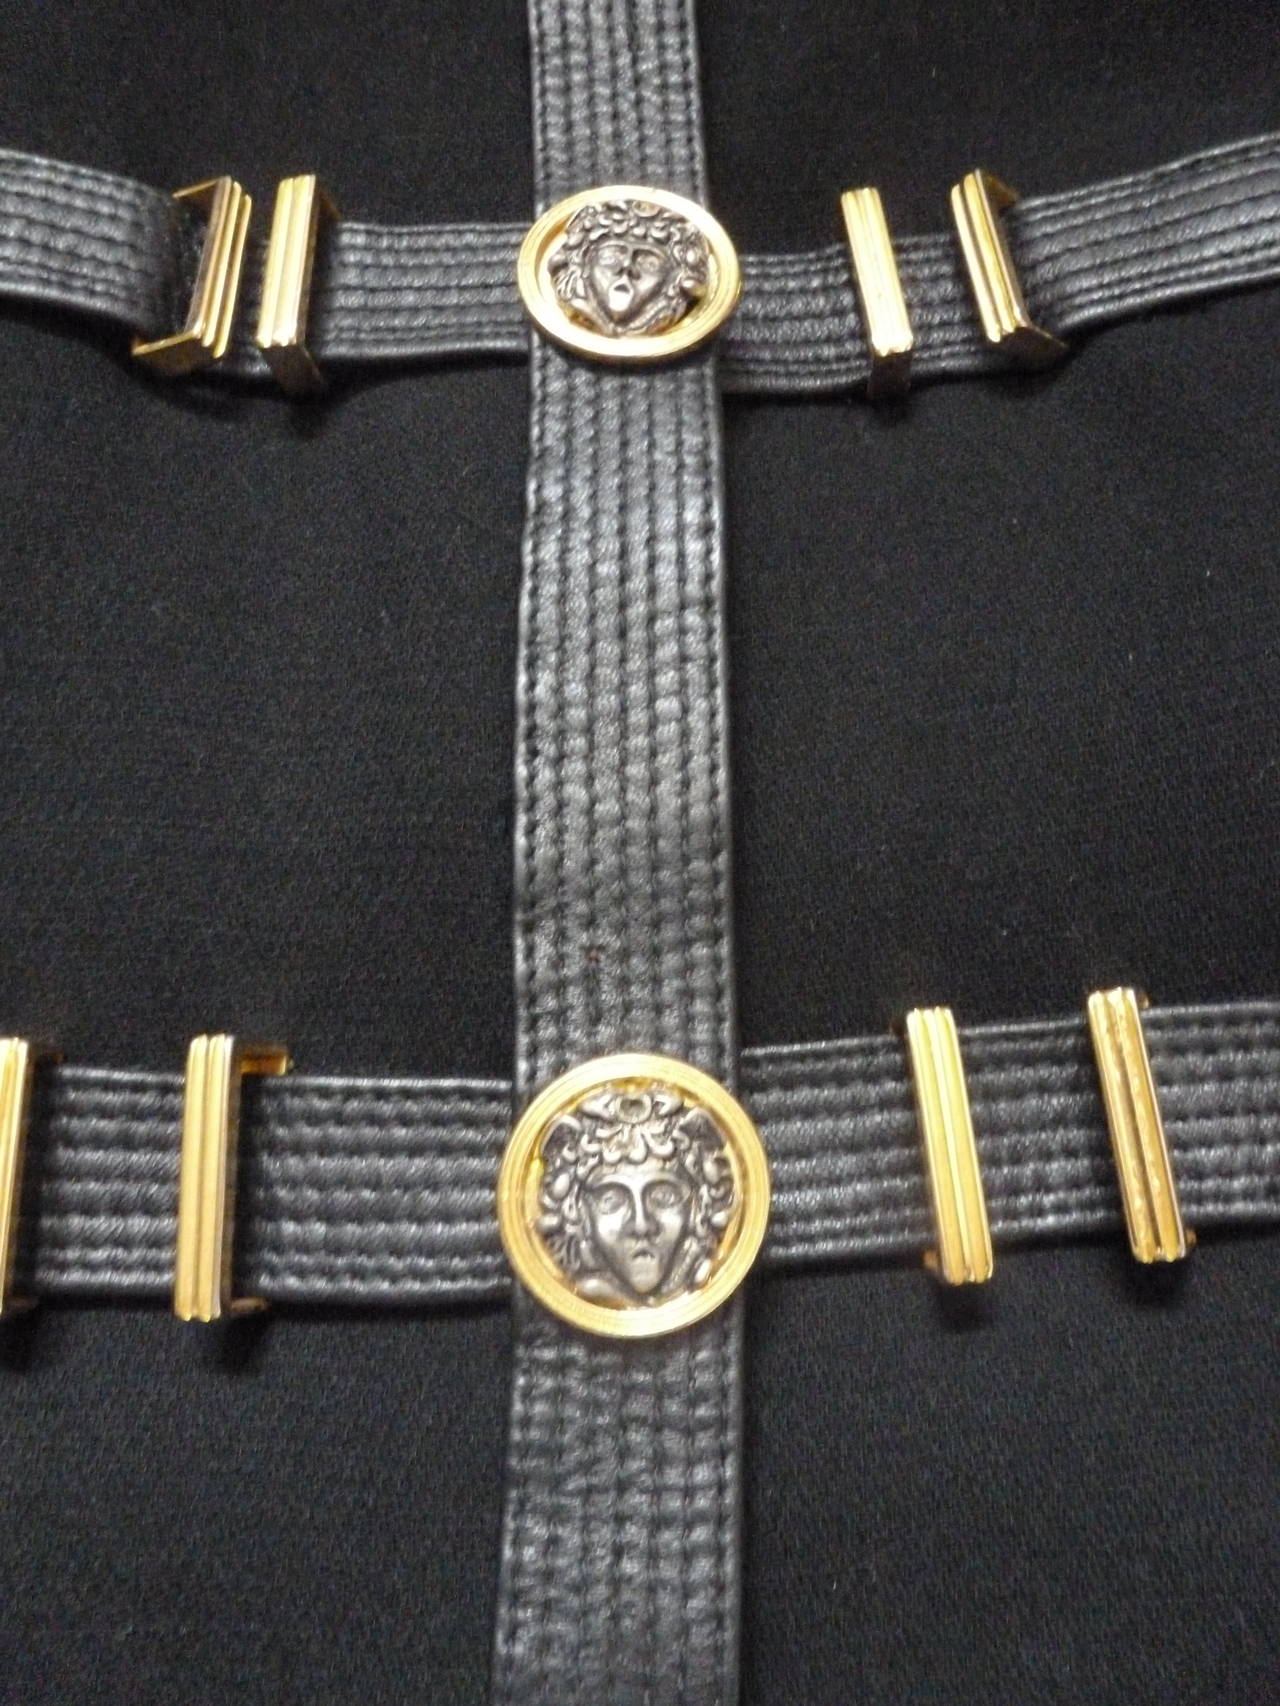 Iconic Gianni Versace Couture Bondage Harness Medallion Ensemble Fall 1992 For Sale 1